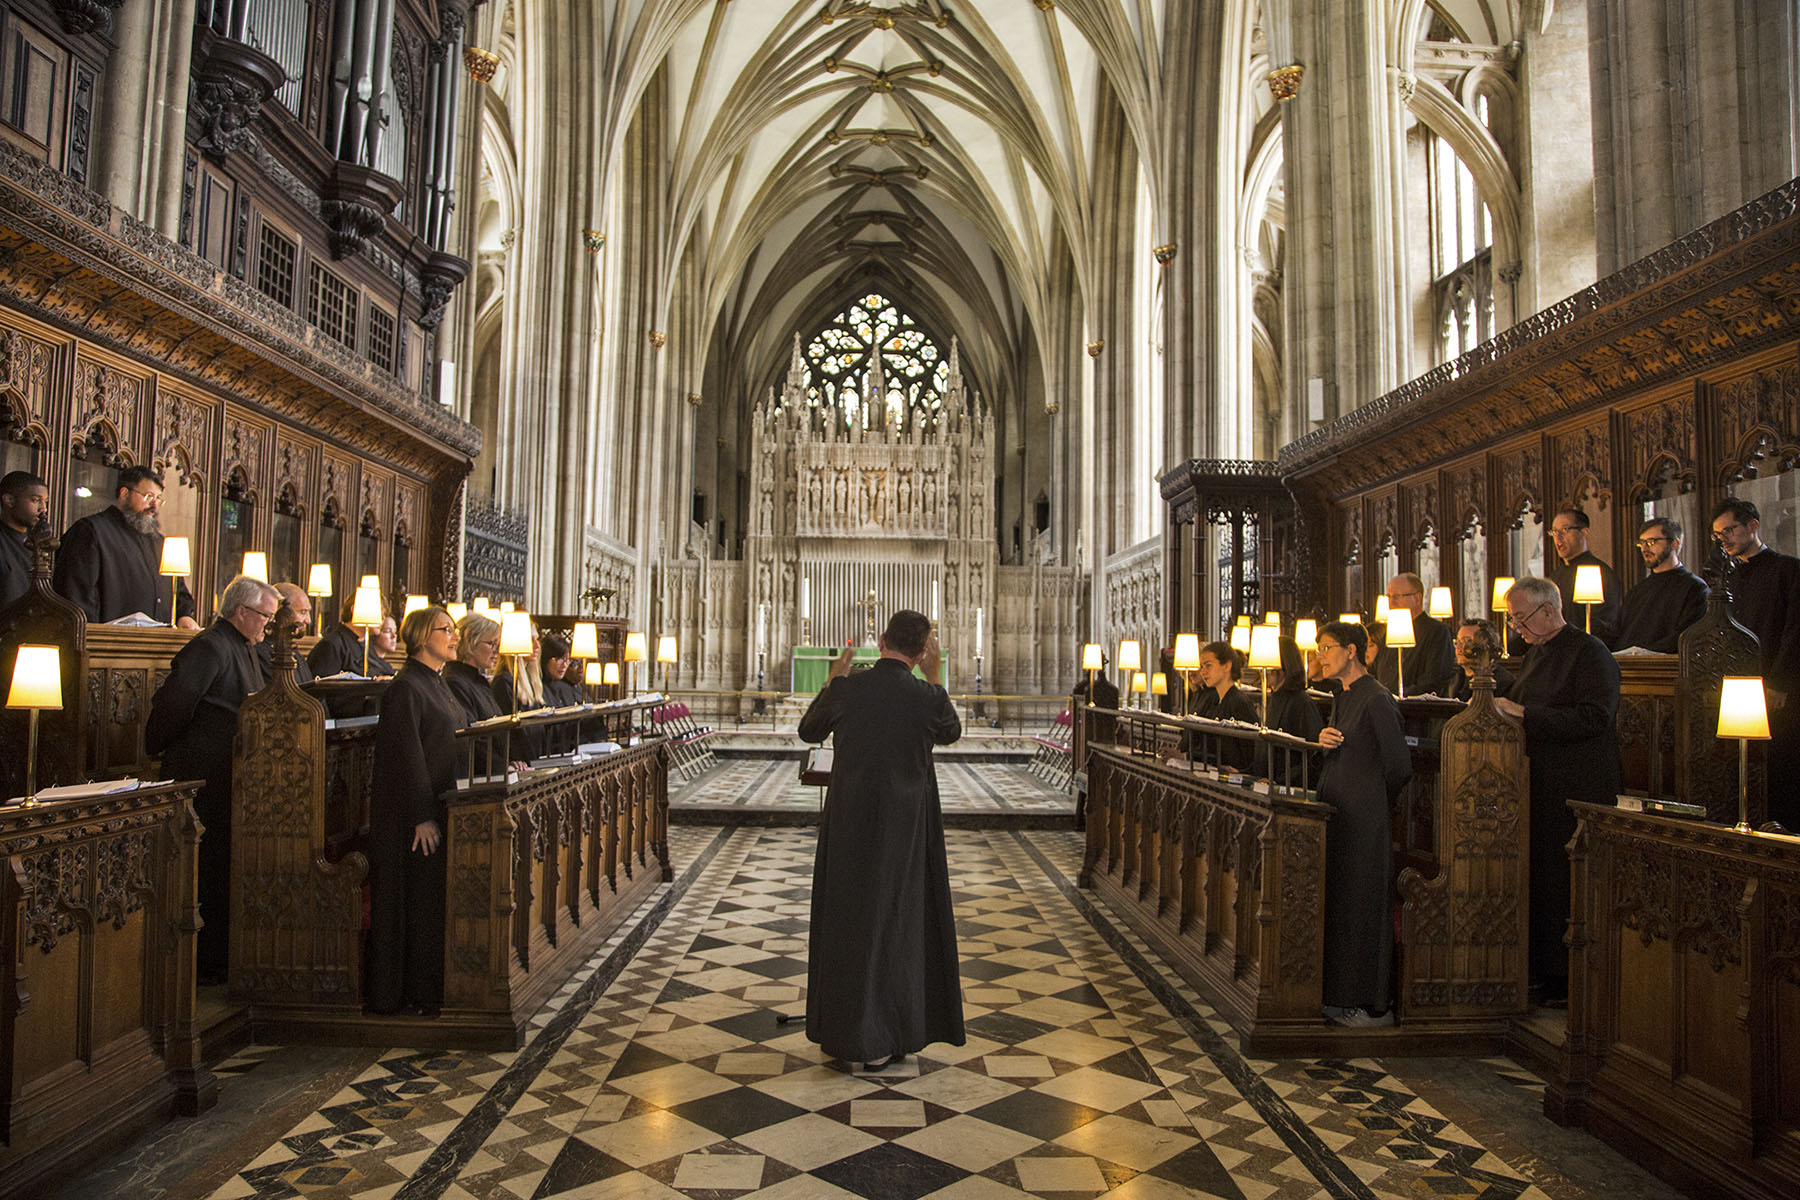 Organist-Choirmaster, Dr. Andrew Moore, conducting the choir during Evensong at Bristol Cathedral.